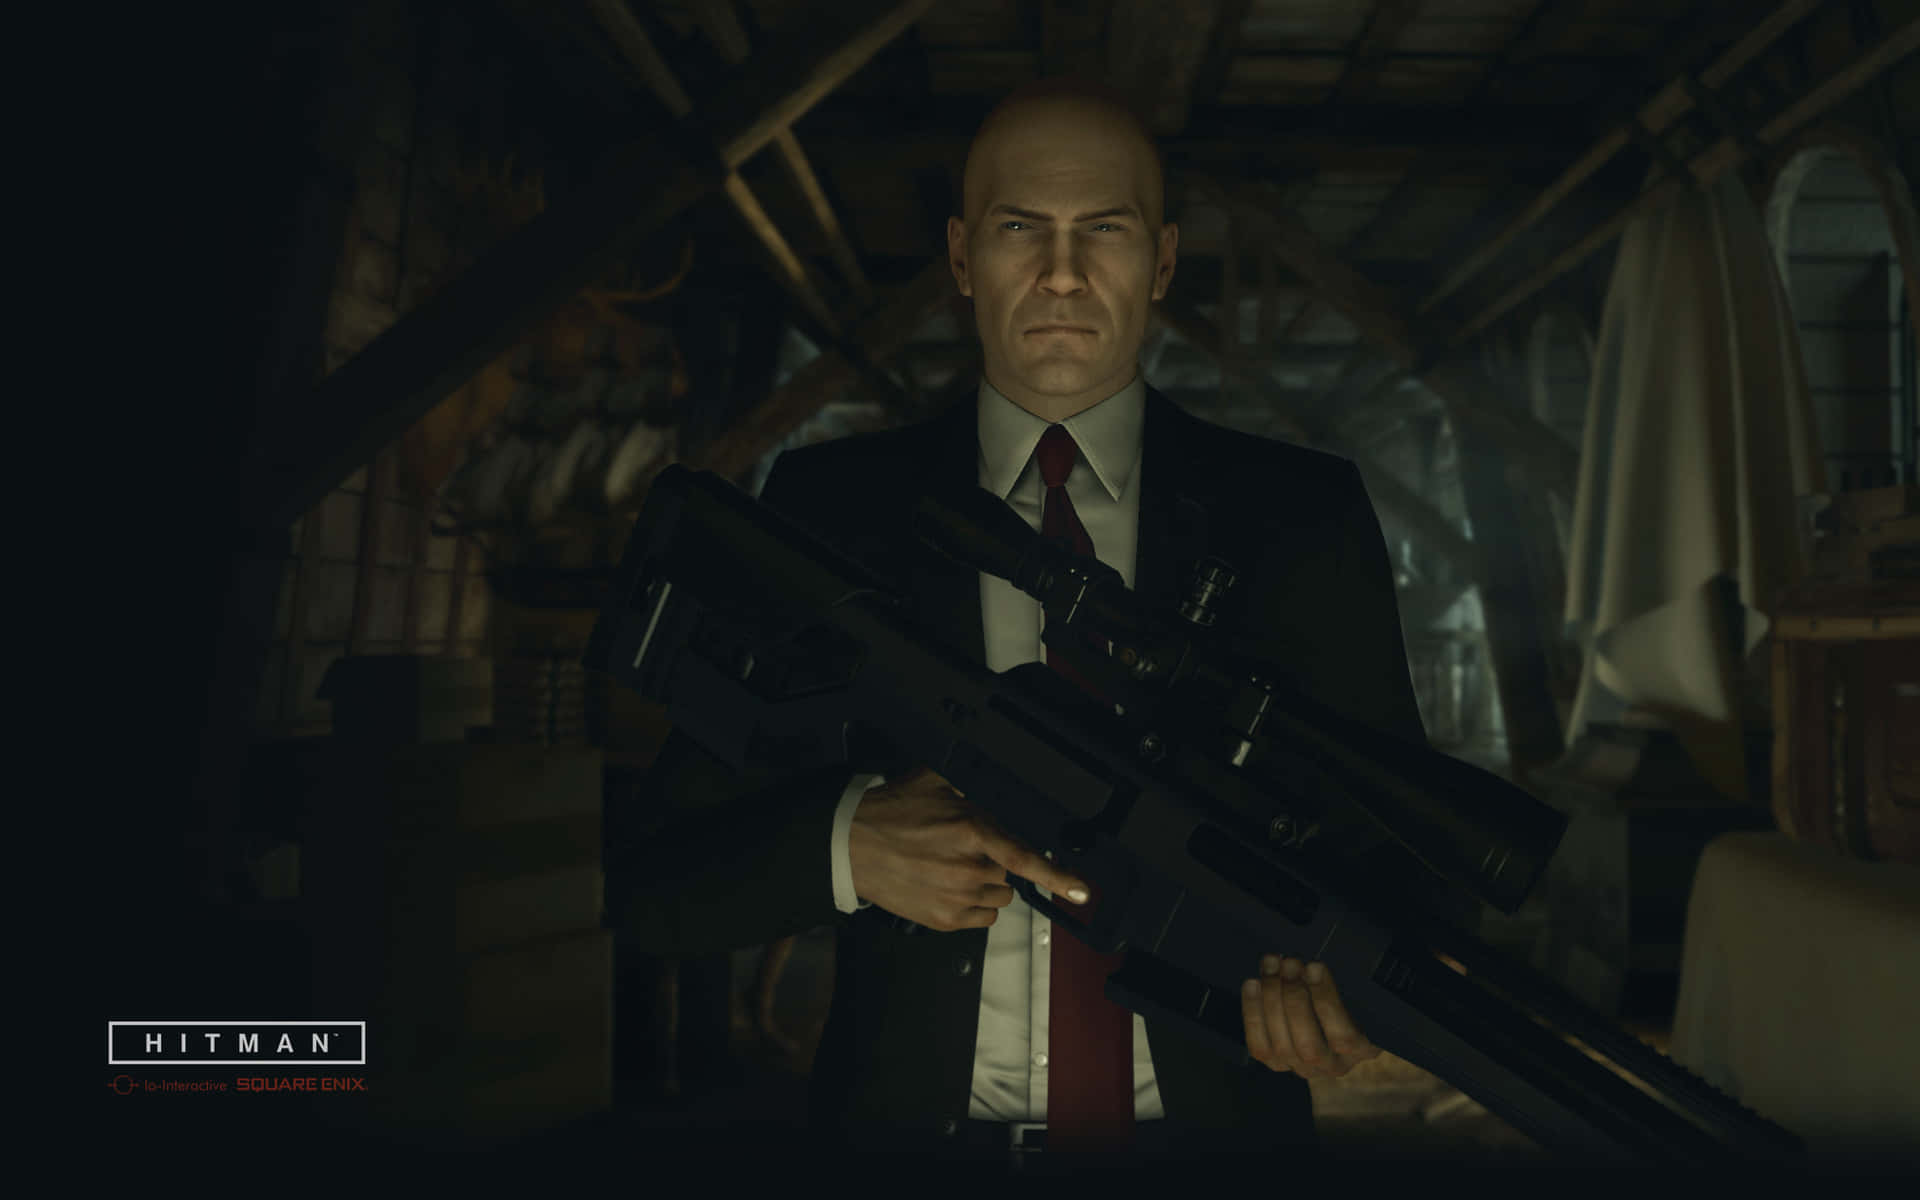 Feeling Lucky? Then have a go at "Hitman: Blood Money," the thrilling stealth game. Wallpaper